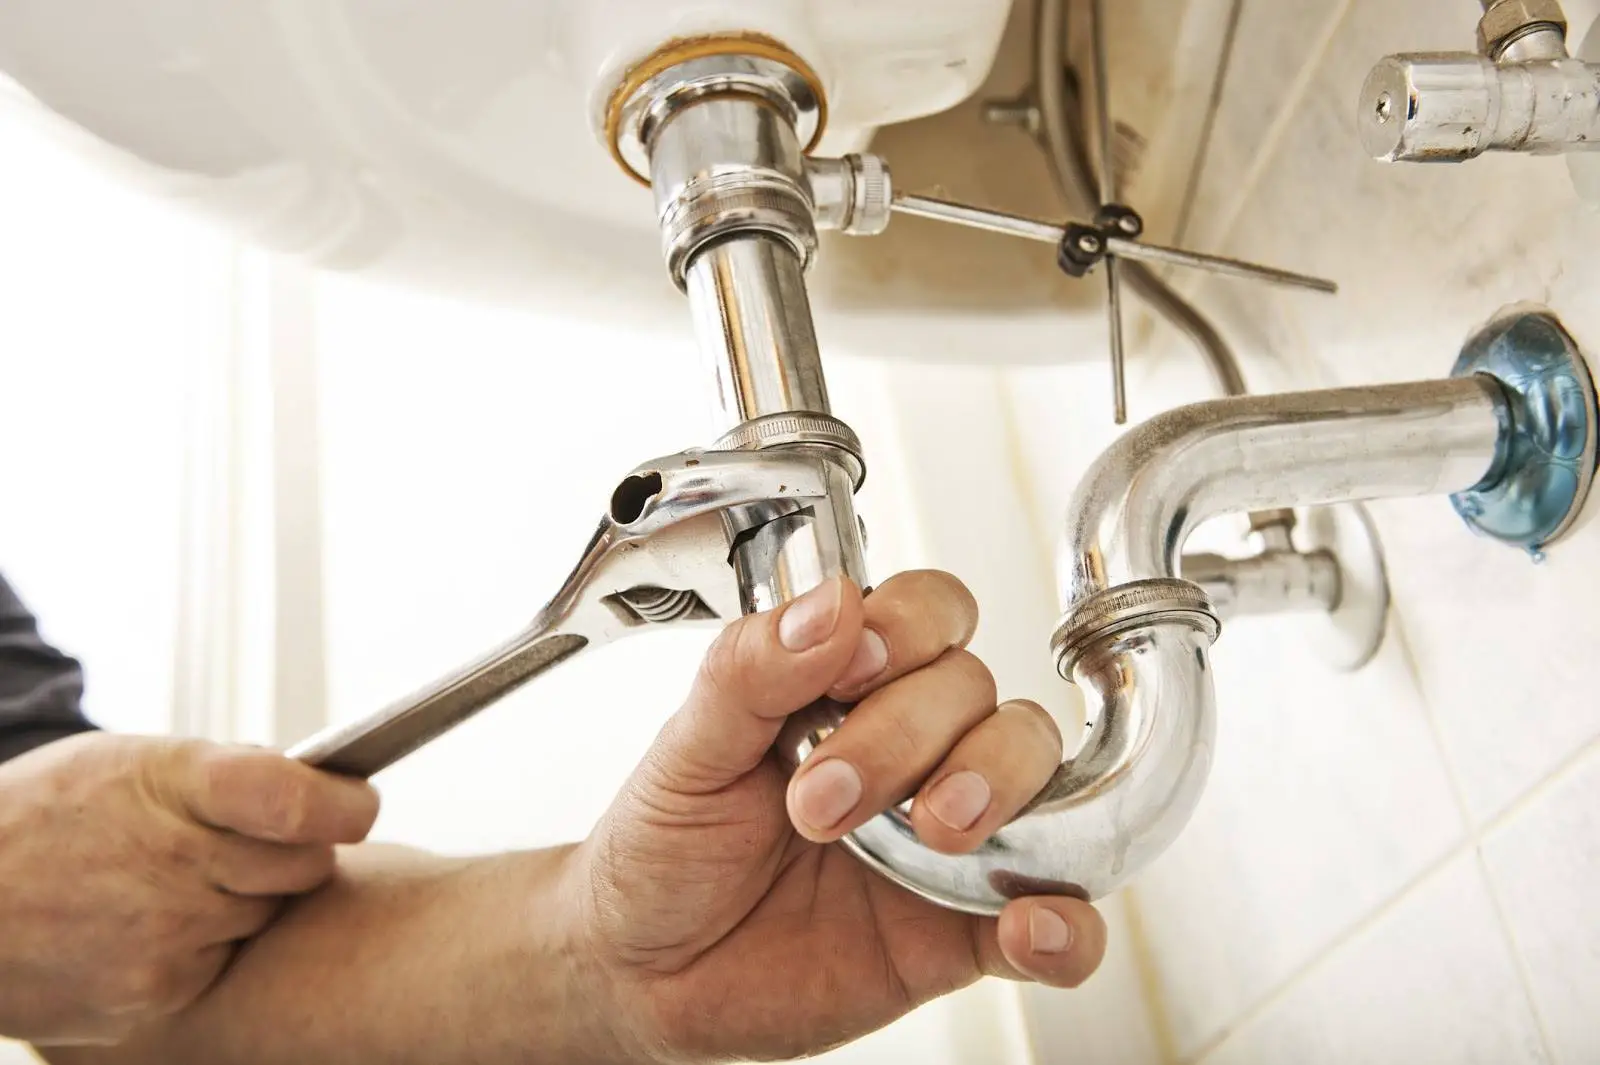 5 Potential Plumbing Issues You Should Inspect Before You Buy a Home